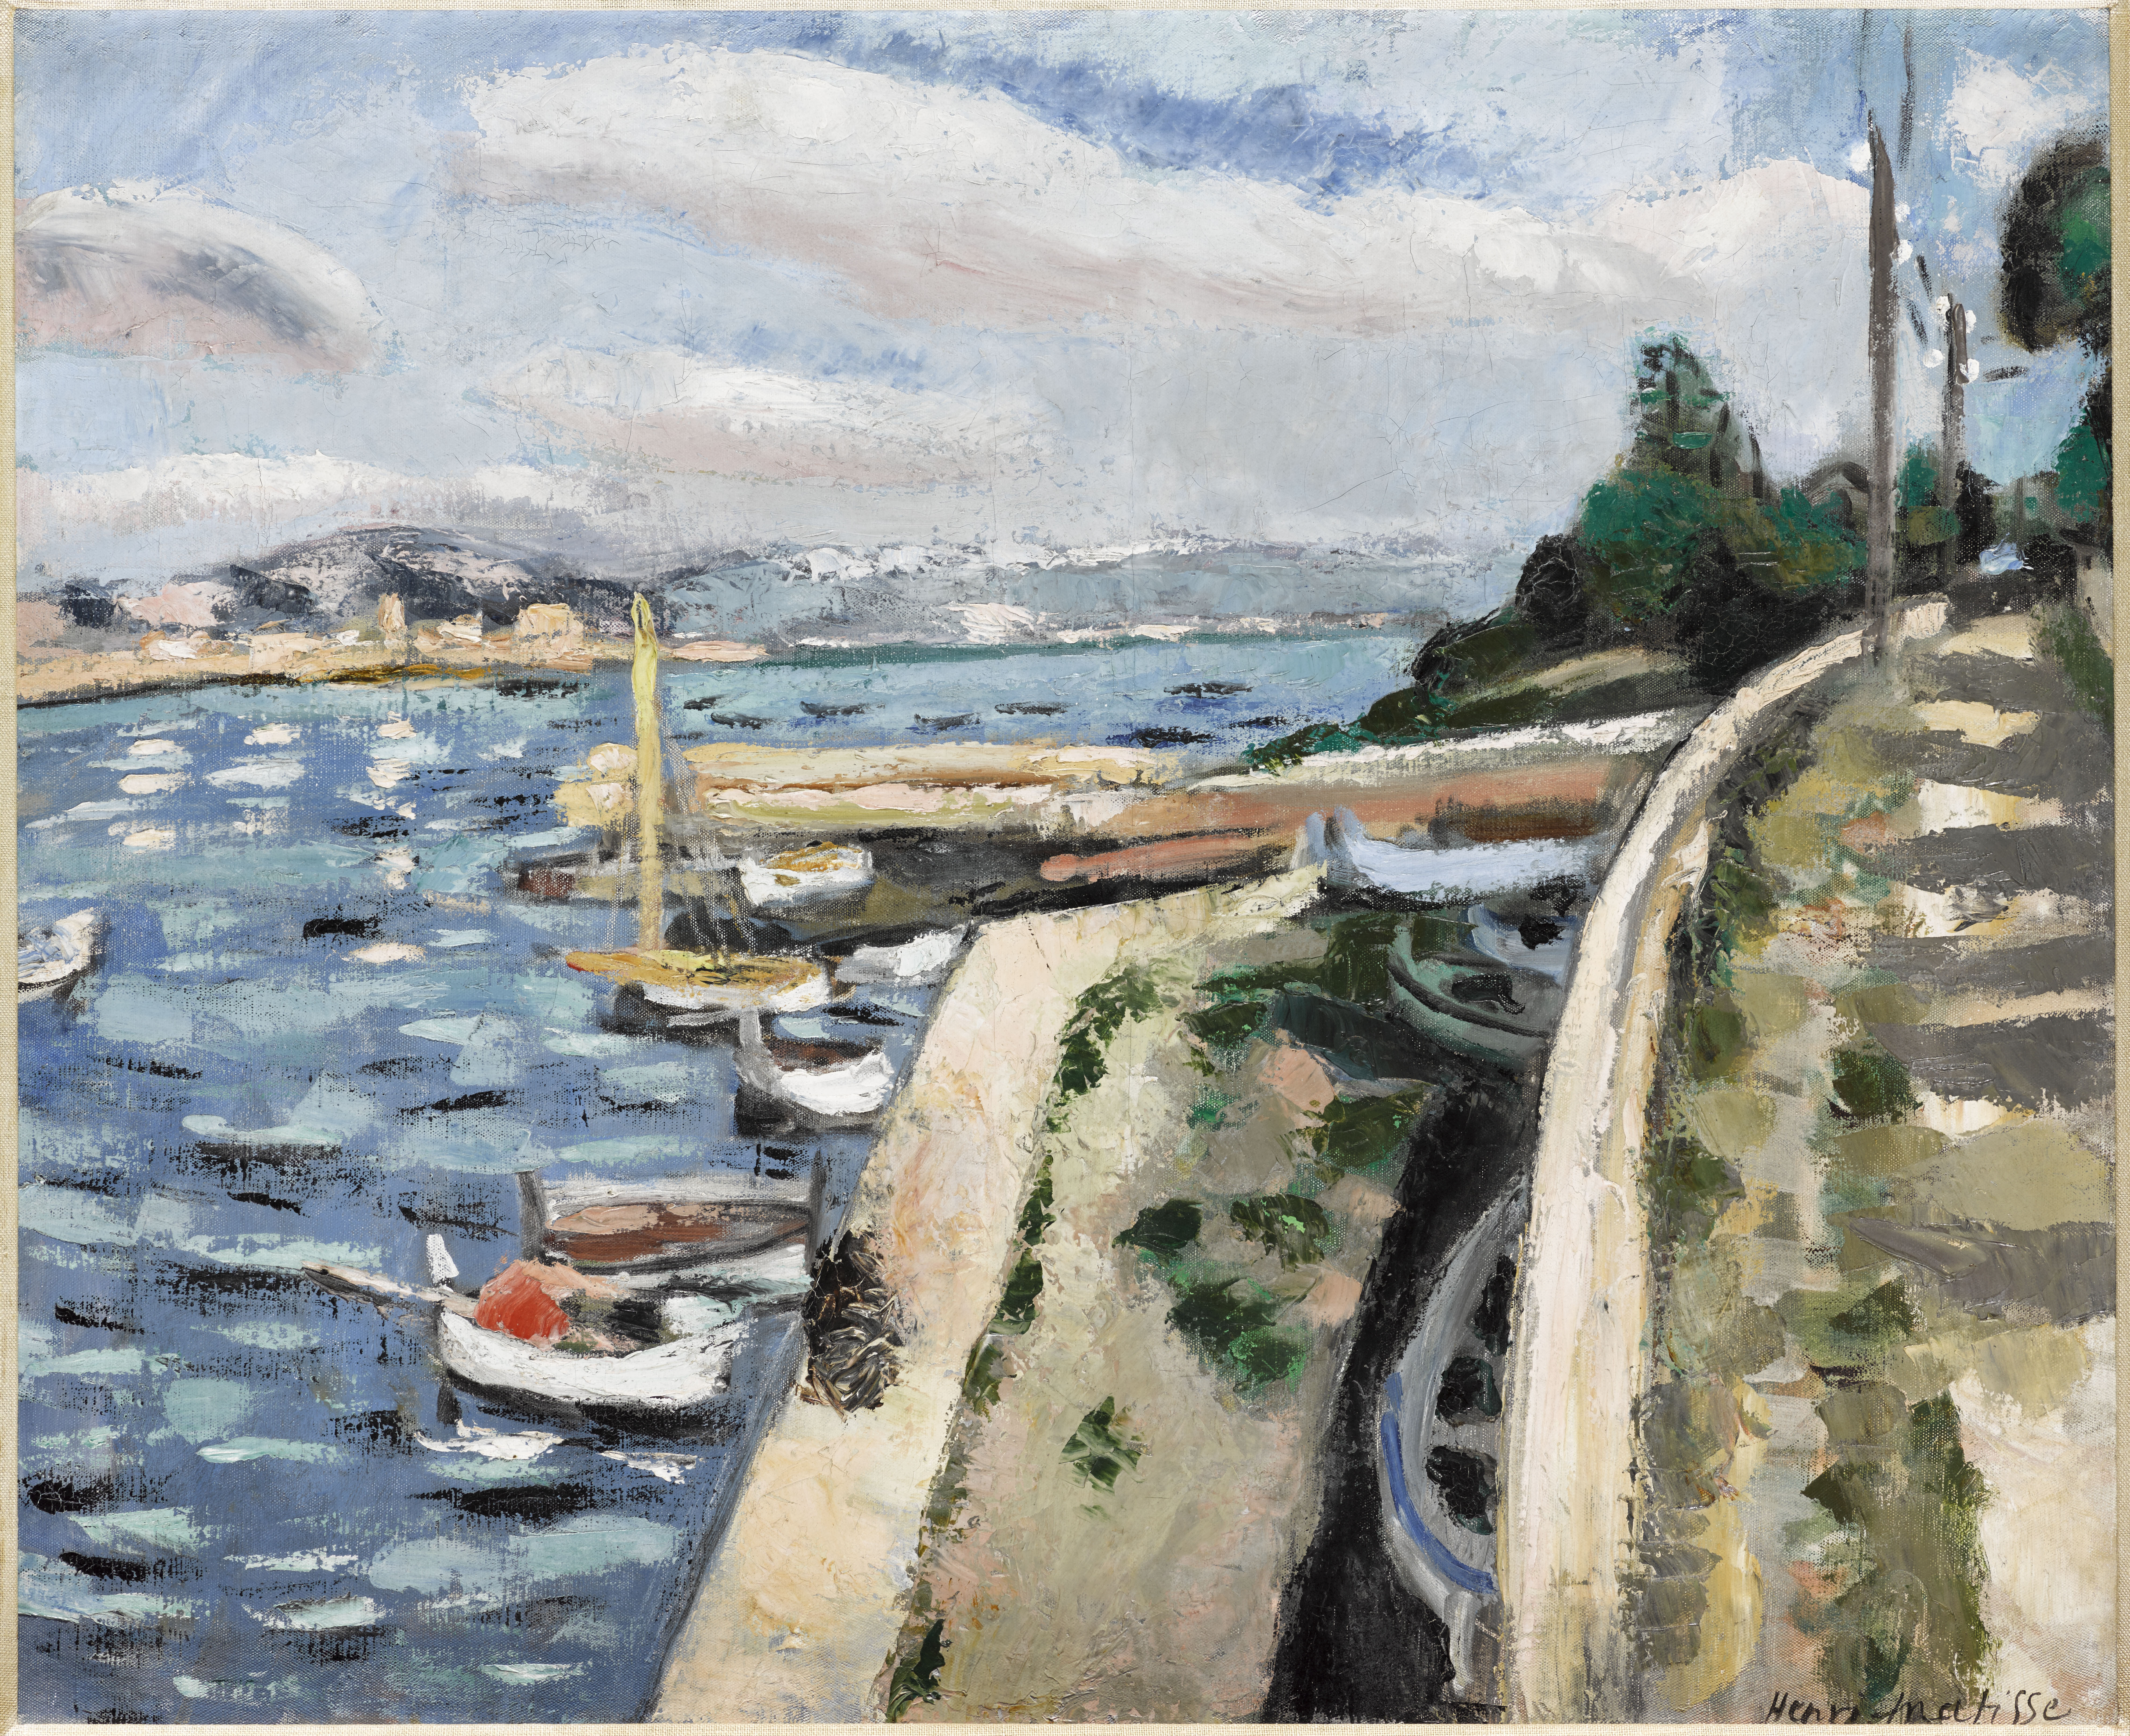 The San Diego Museum of Art Welcomes Monet to Matisse